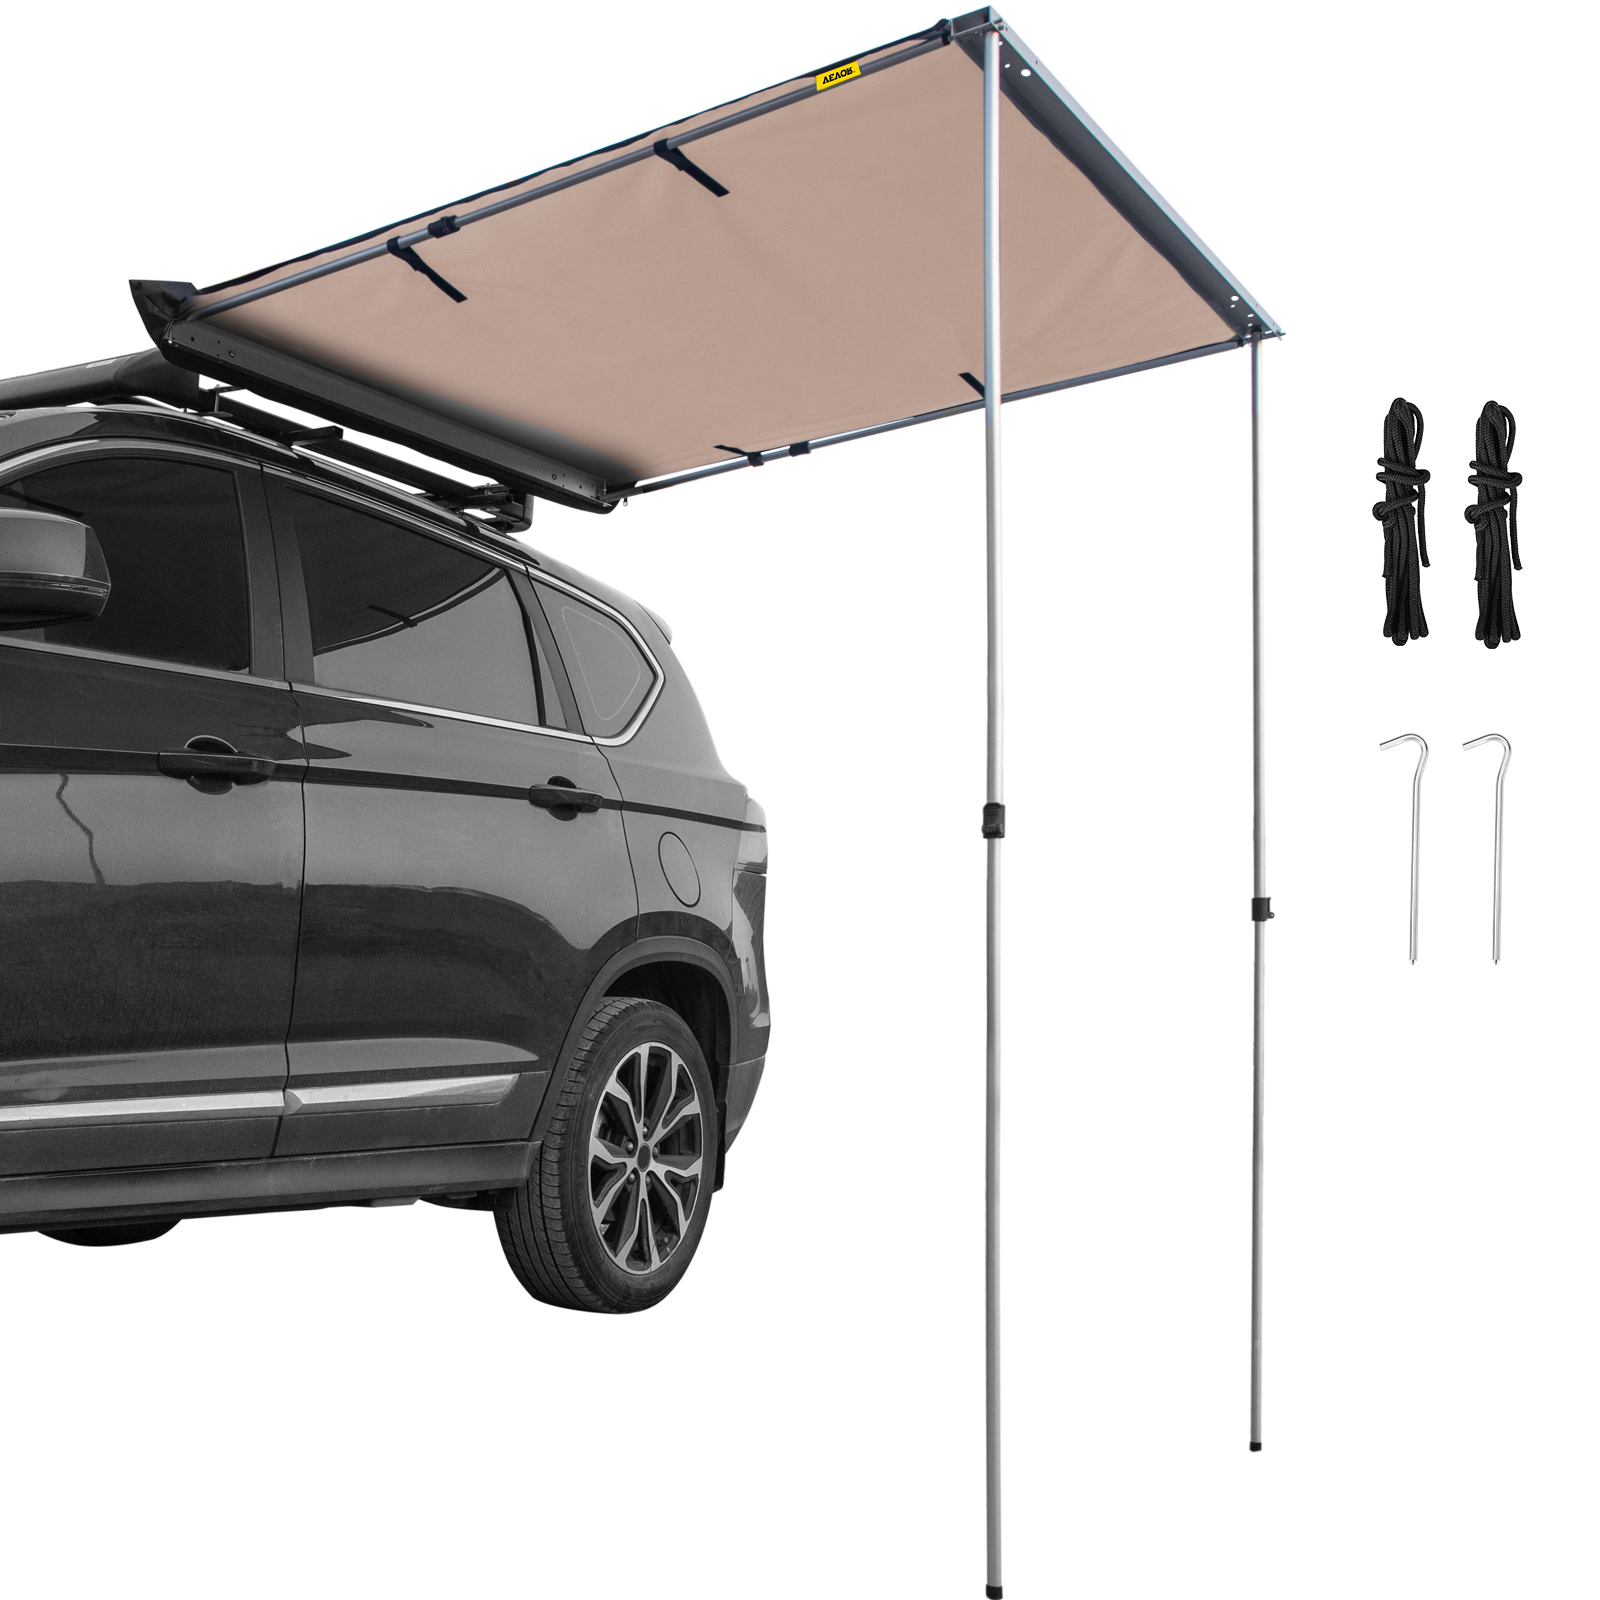 VEVOR Car Awning Car Tent Retractable Waterproof SUV Rooftop Khaki 5'x6.5' от Vevor Many GEOs